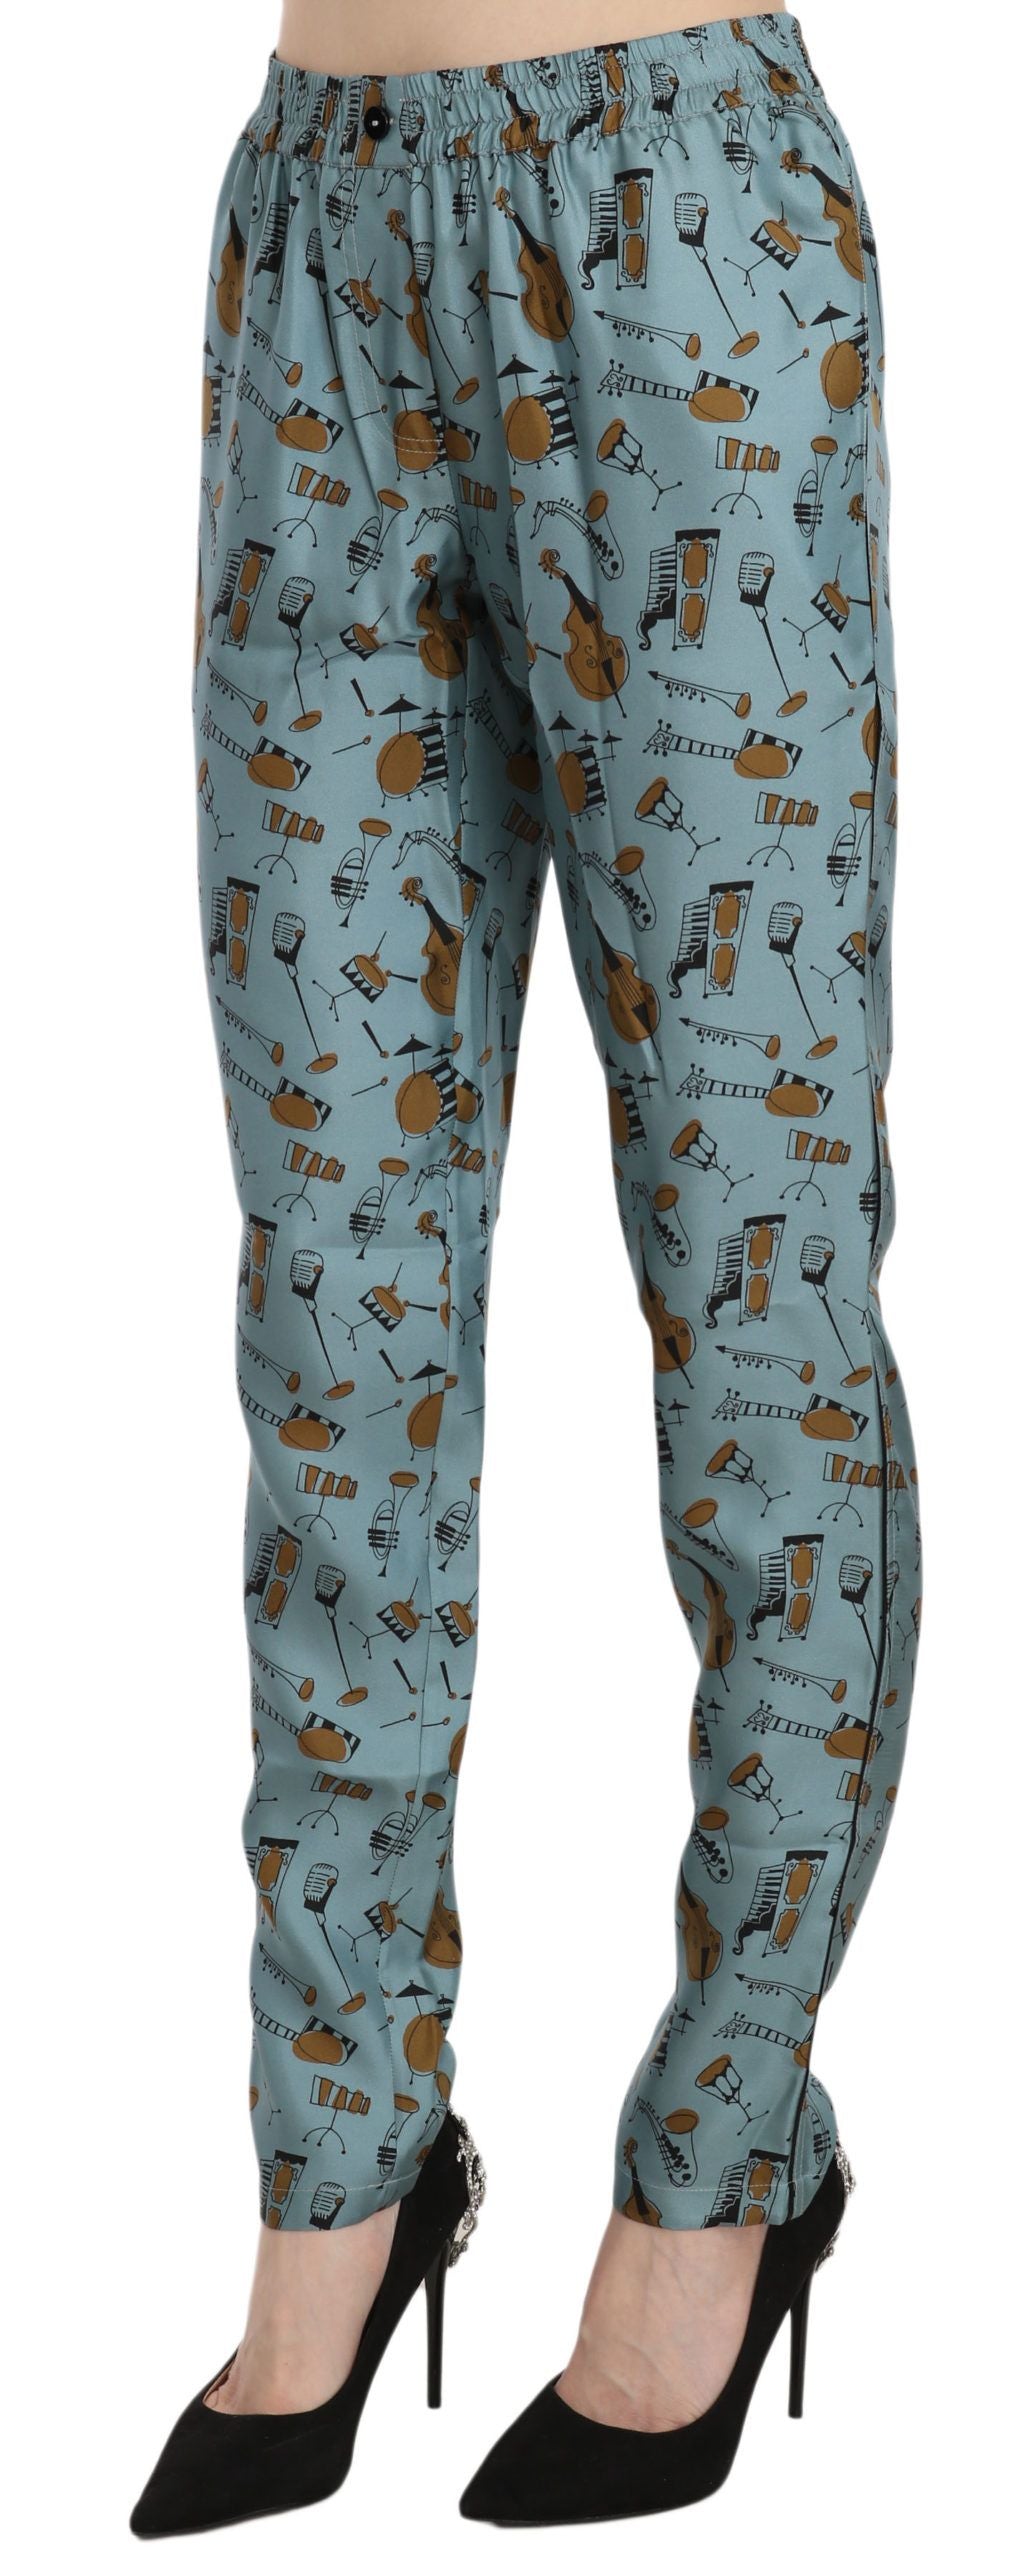 Dolce & Gabbana Blue Musical Instruments Print Tapered Pants